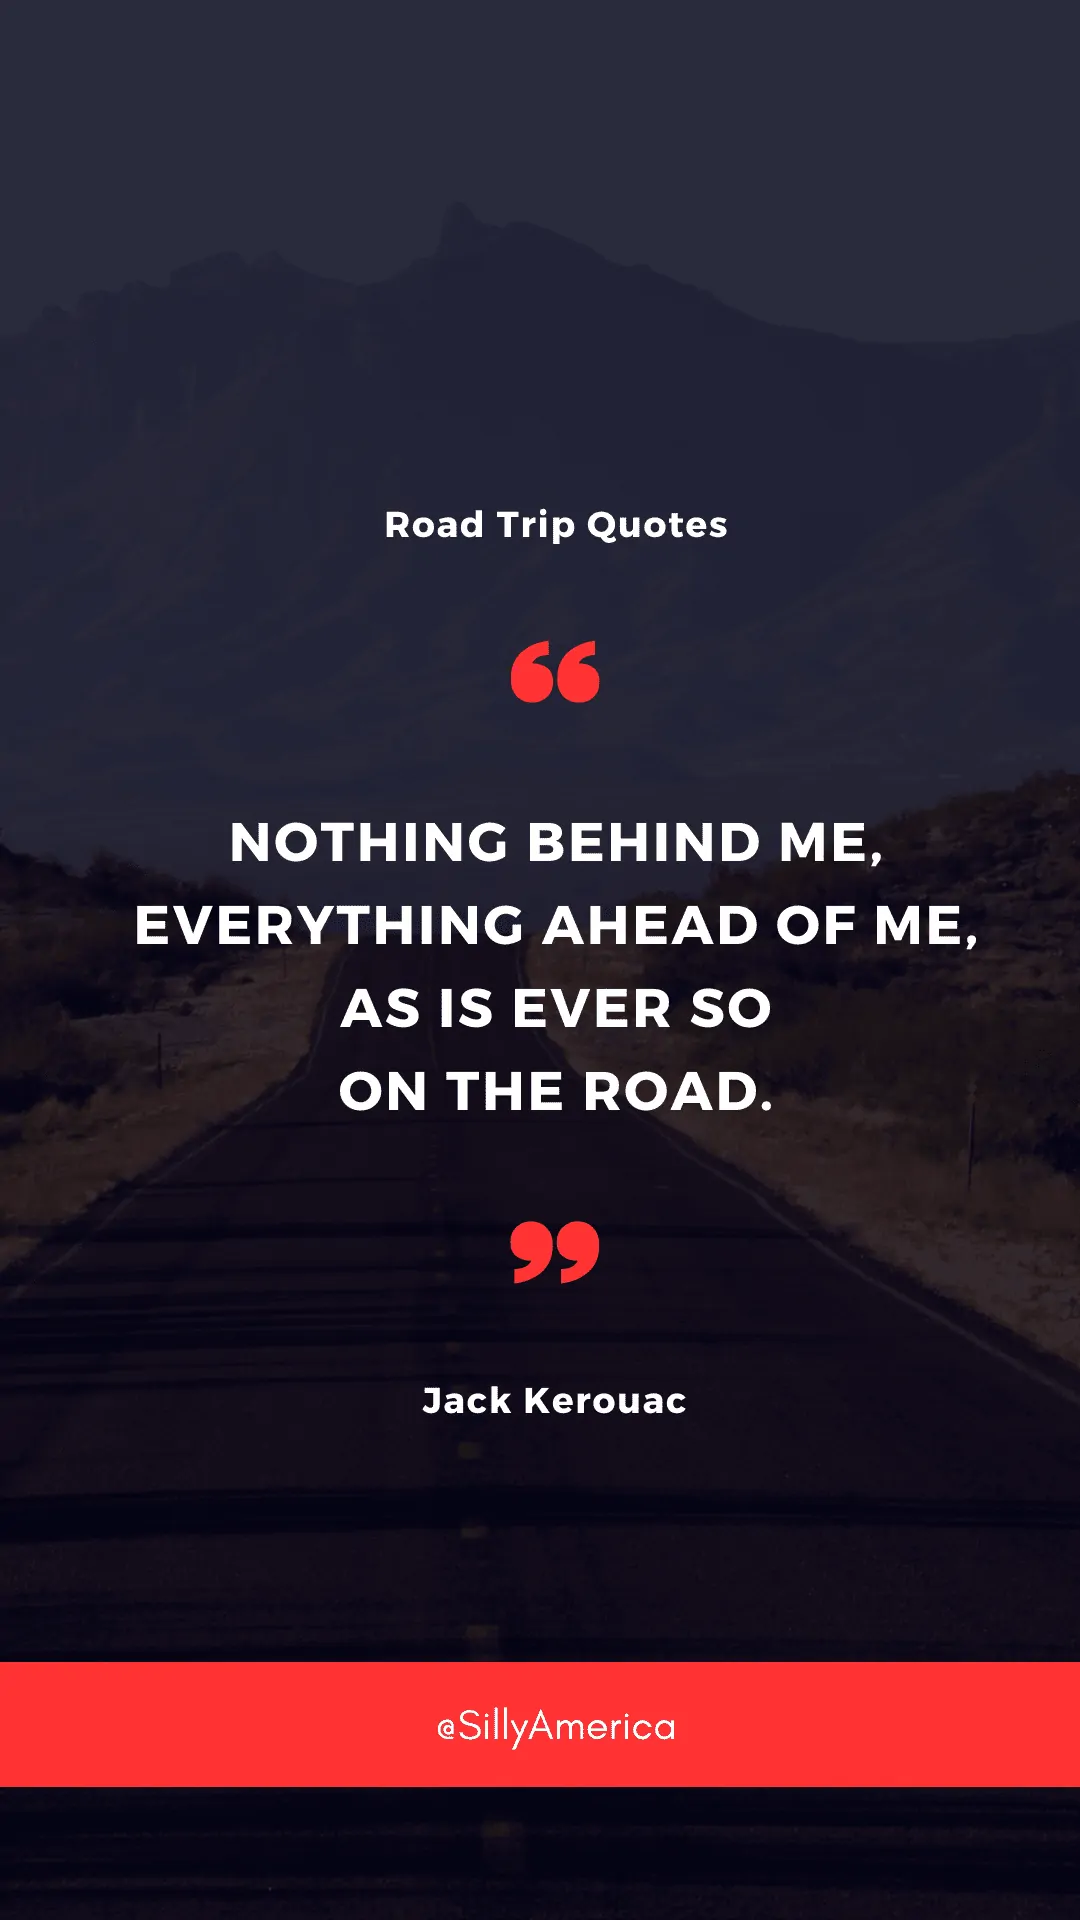 “Nothing behind me, everything ahead of me, as is ever so on the road.” Jack Kerouac, On the Road - ROAD TRIP QUOTES